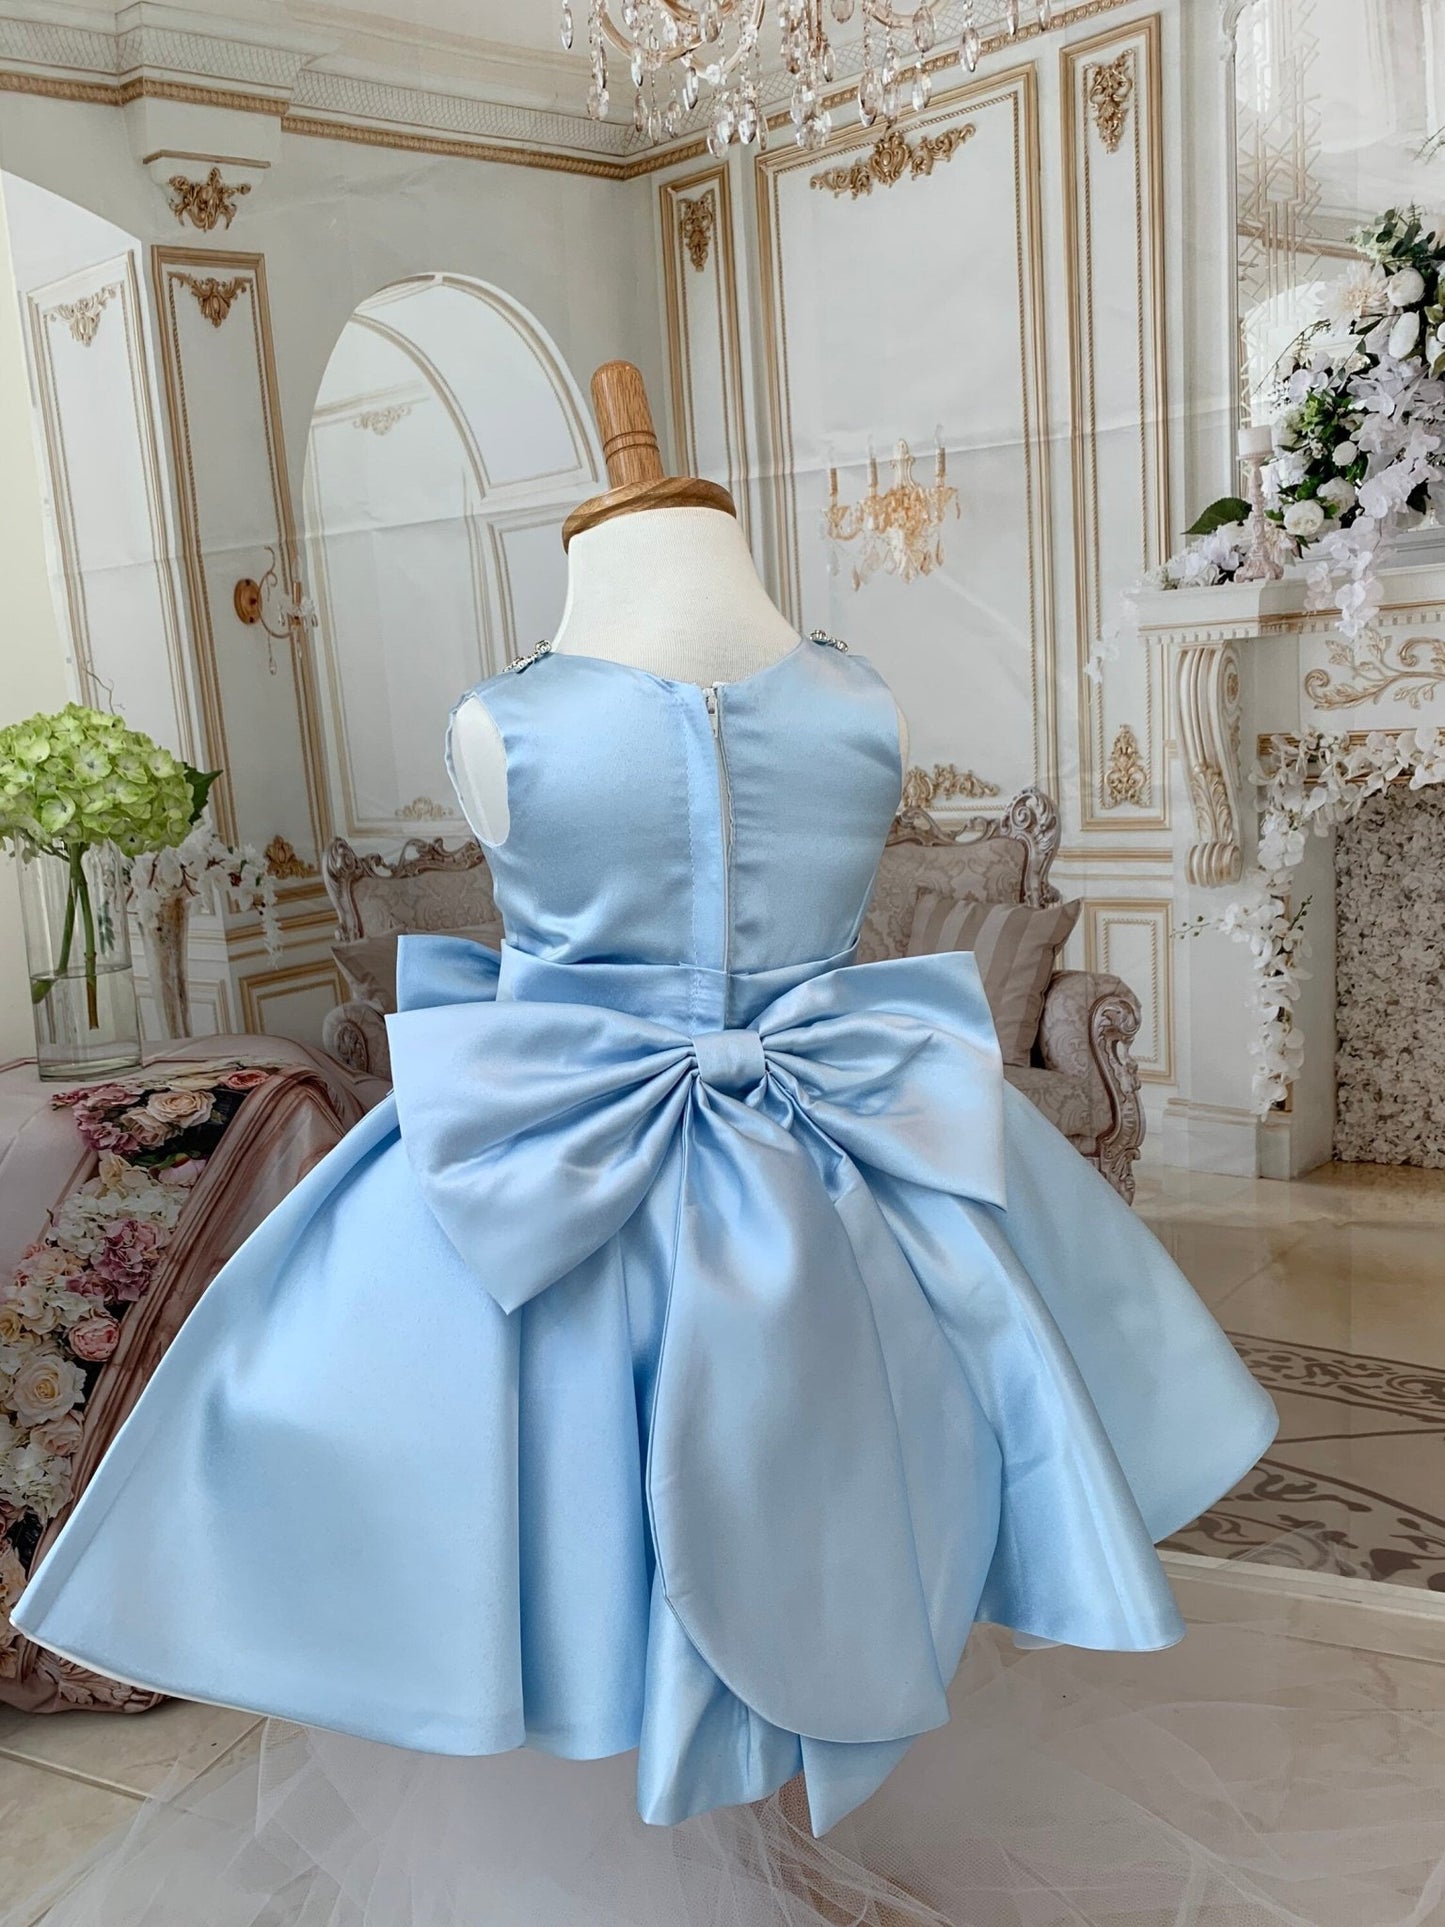 Soft Blue Baby Girl Formal Dress - First Birthday or Flower Girl Dress - TinySweetPeaBoutique